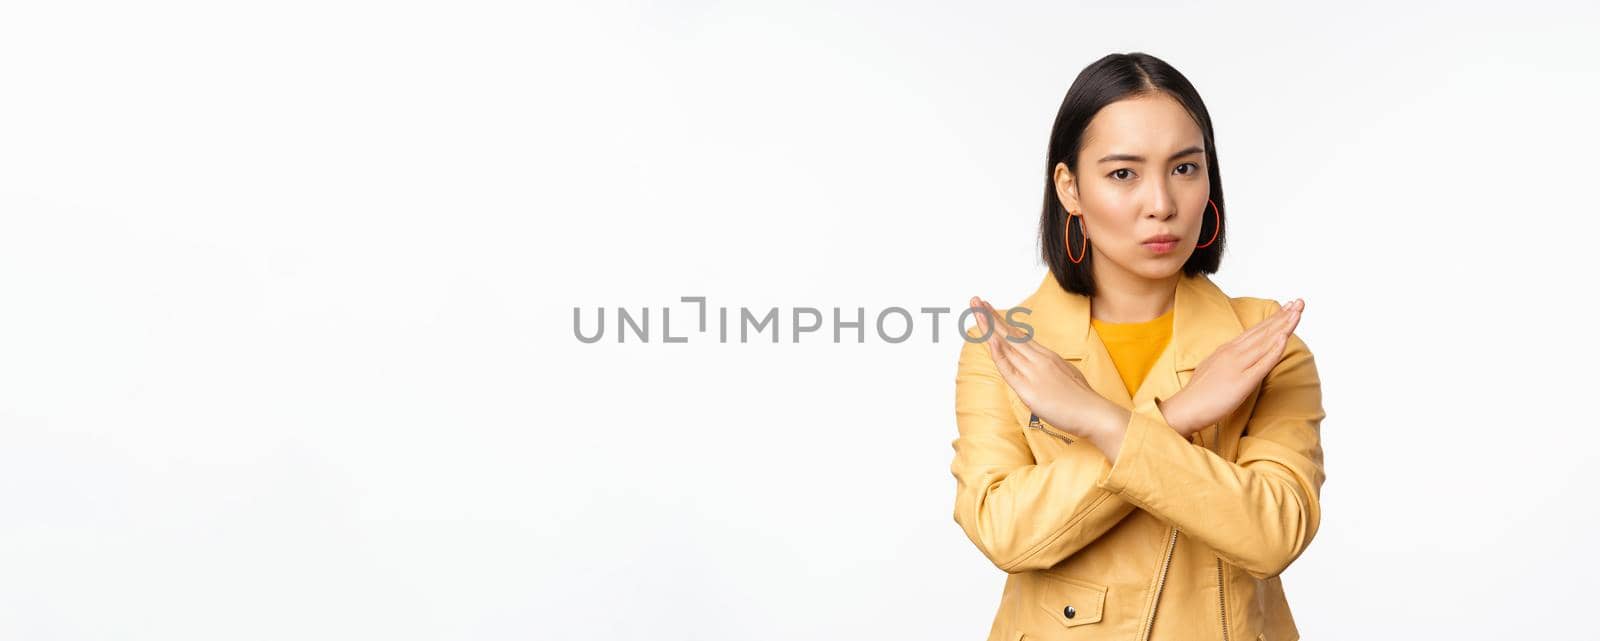 Stop gesture. Serious asian woman making arm cross, prohibit smth, rejecting, dislike and disapprove action, standing over white background.